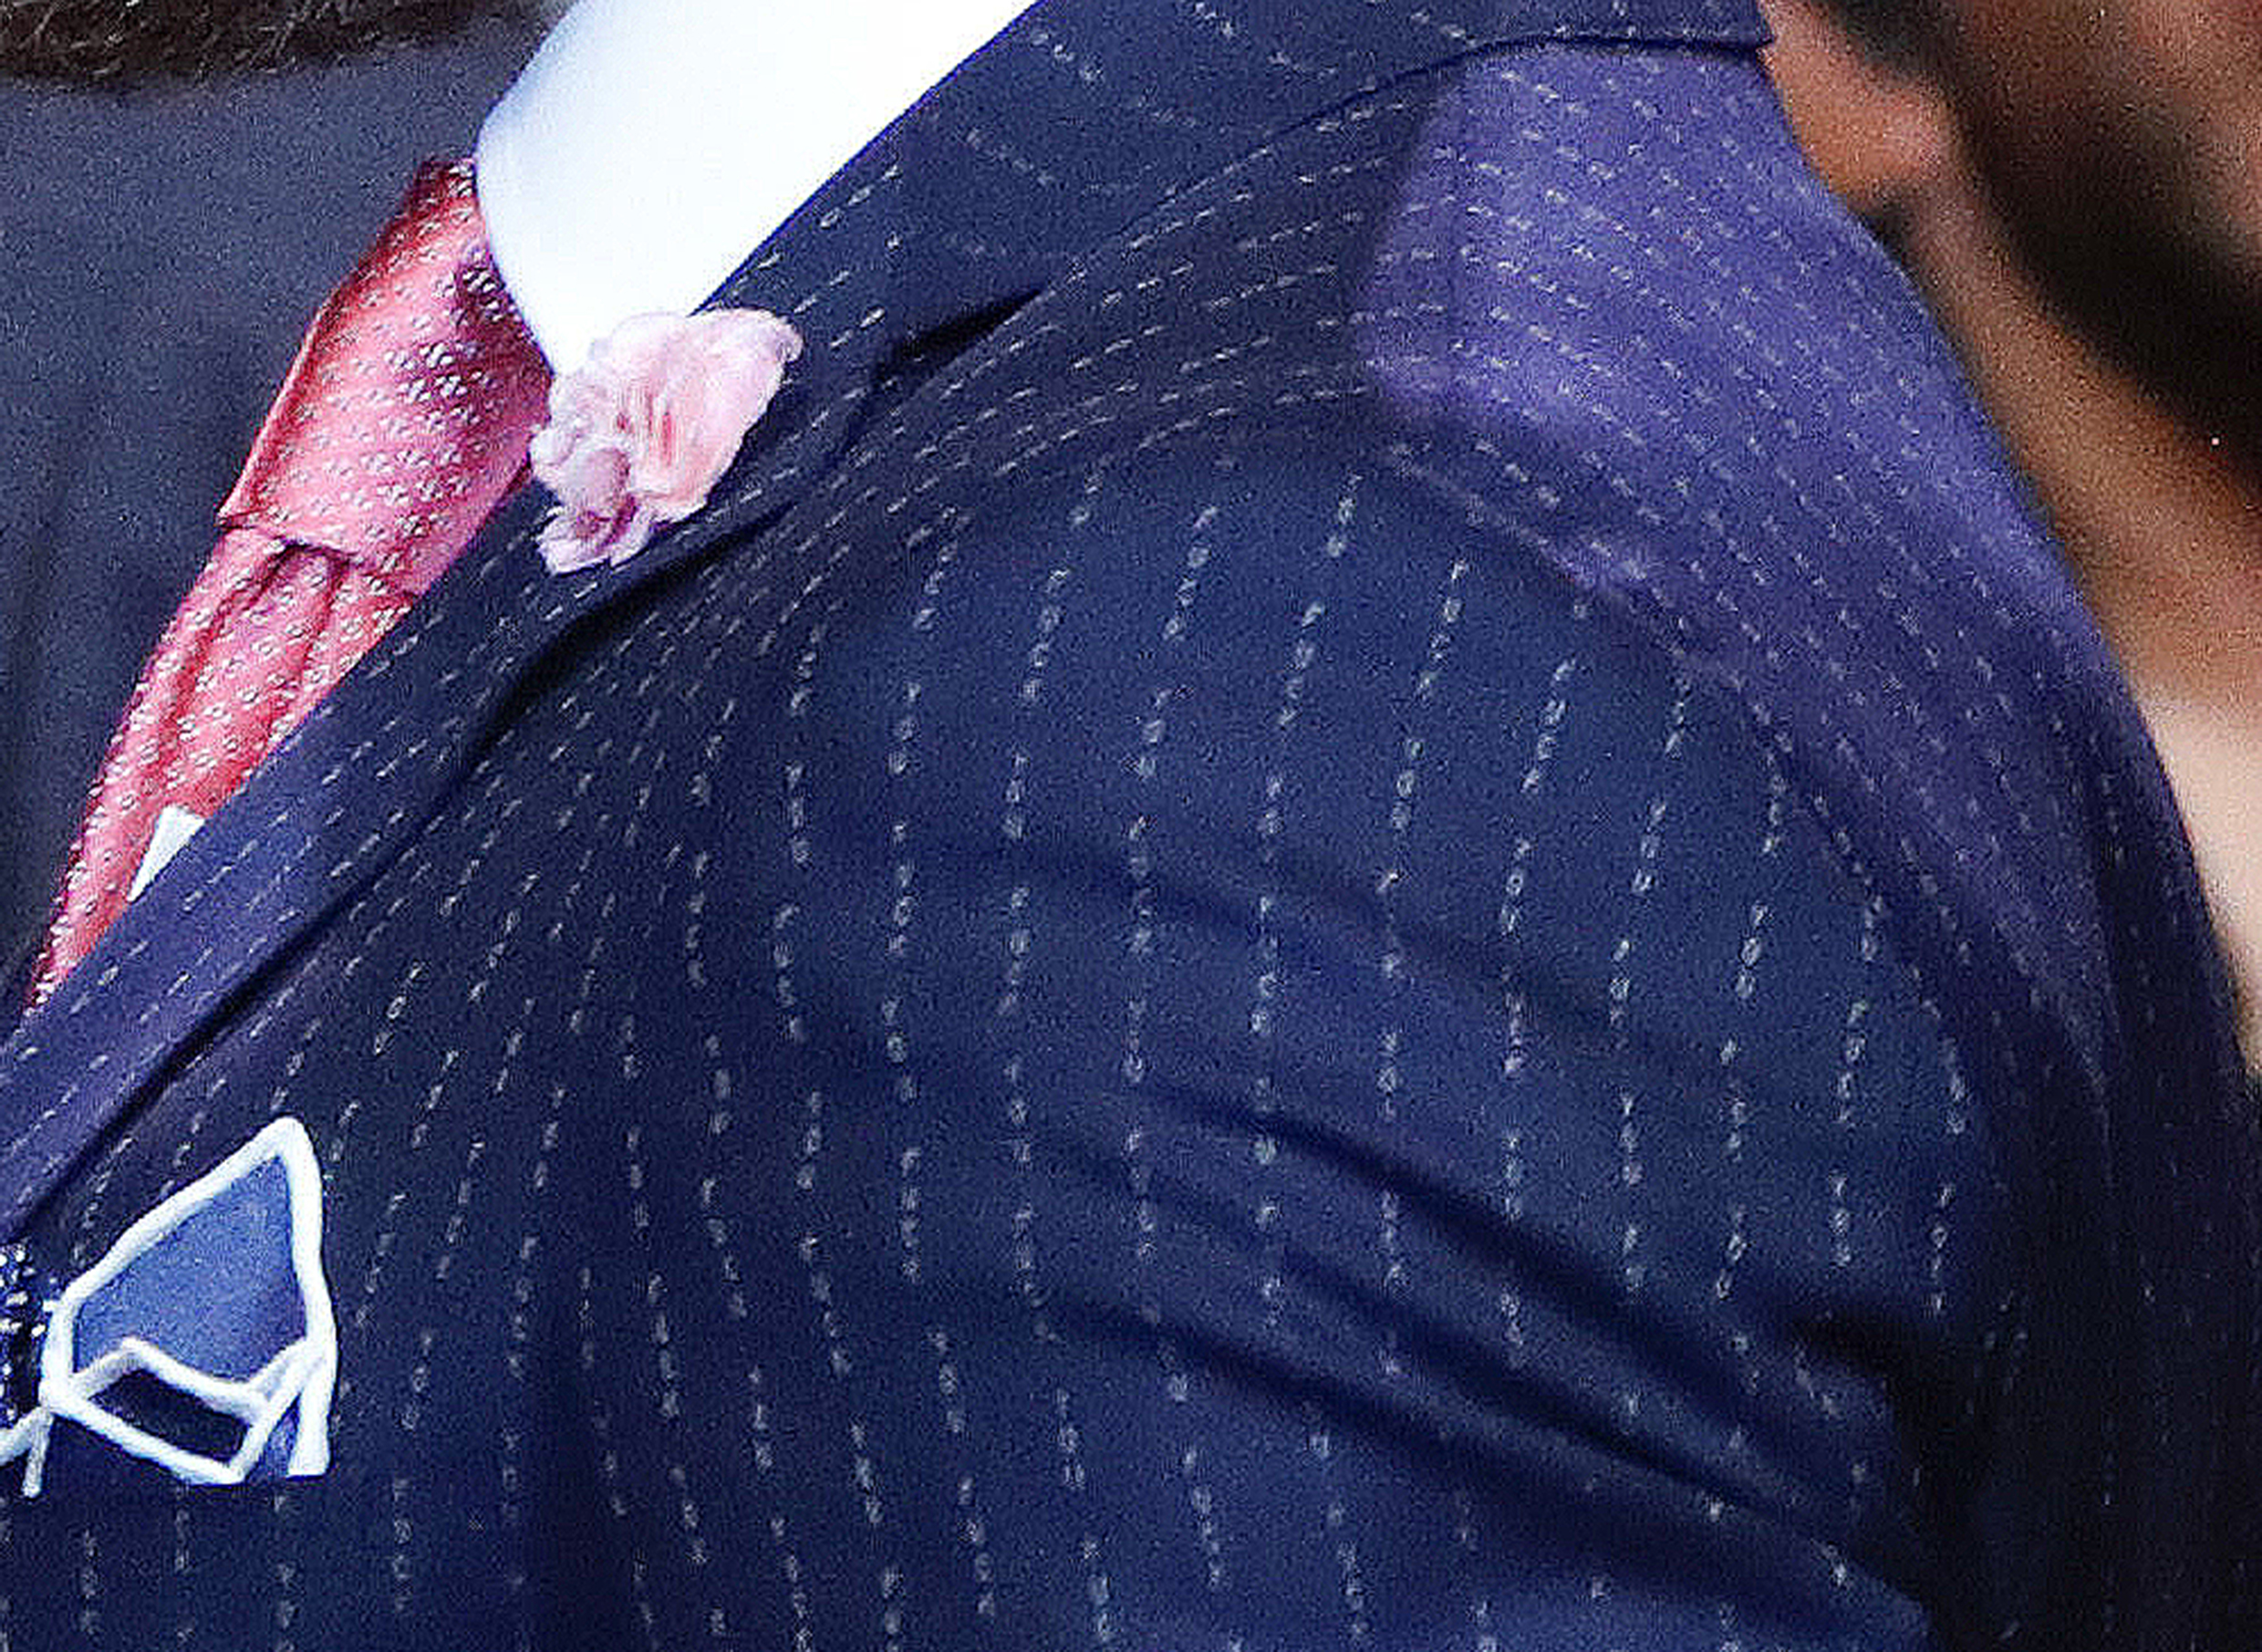 Did you spot the message hidden in the pinstripe of Conor McGregor’s custom suit?2480 x 1811